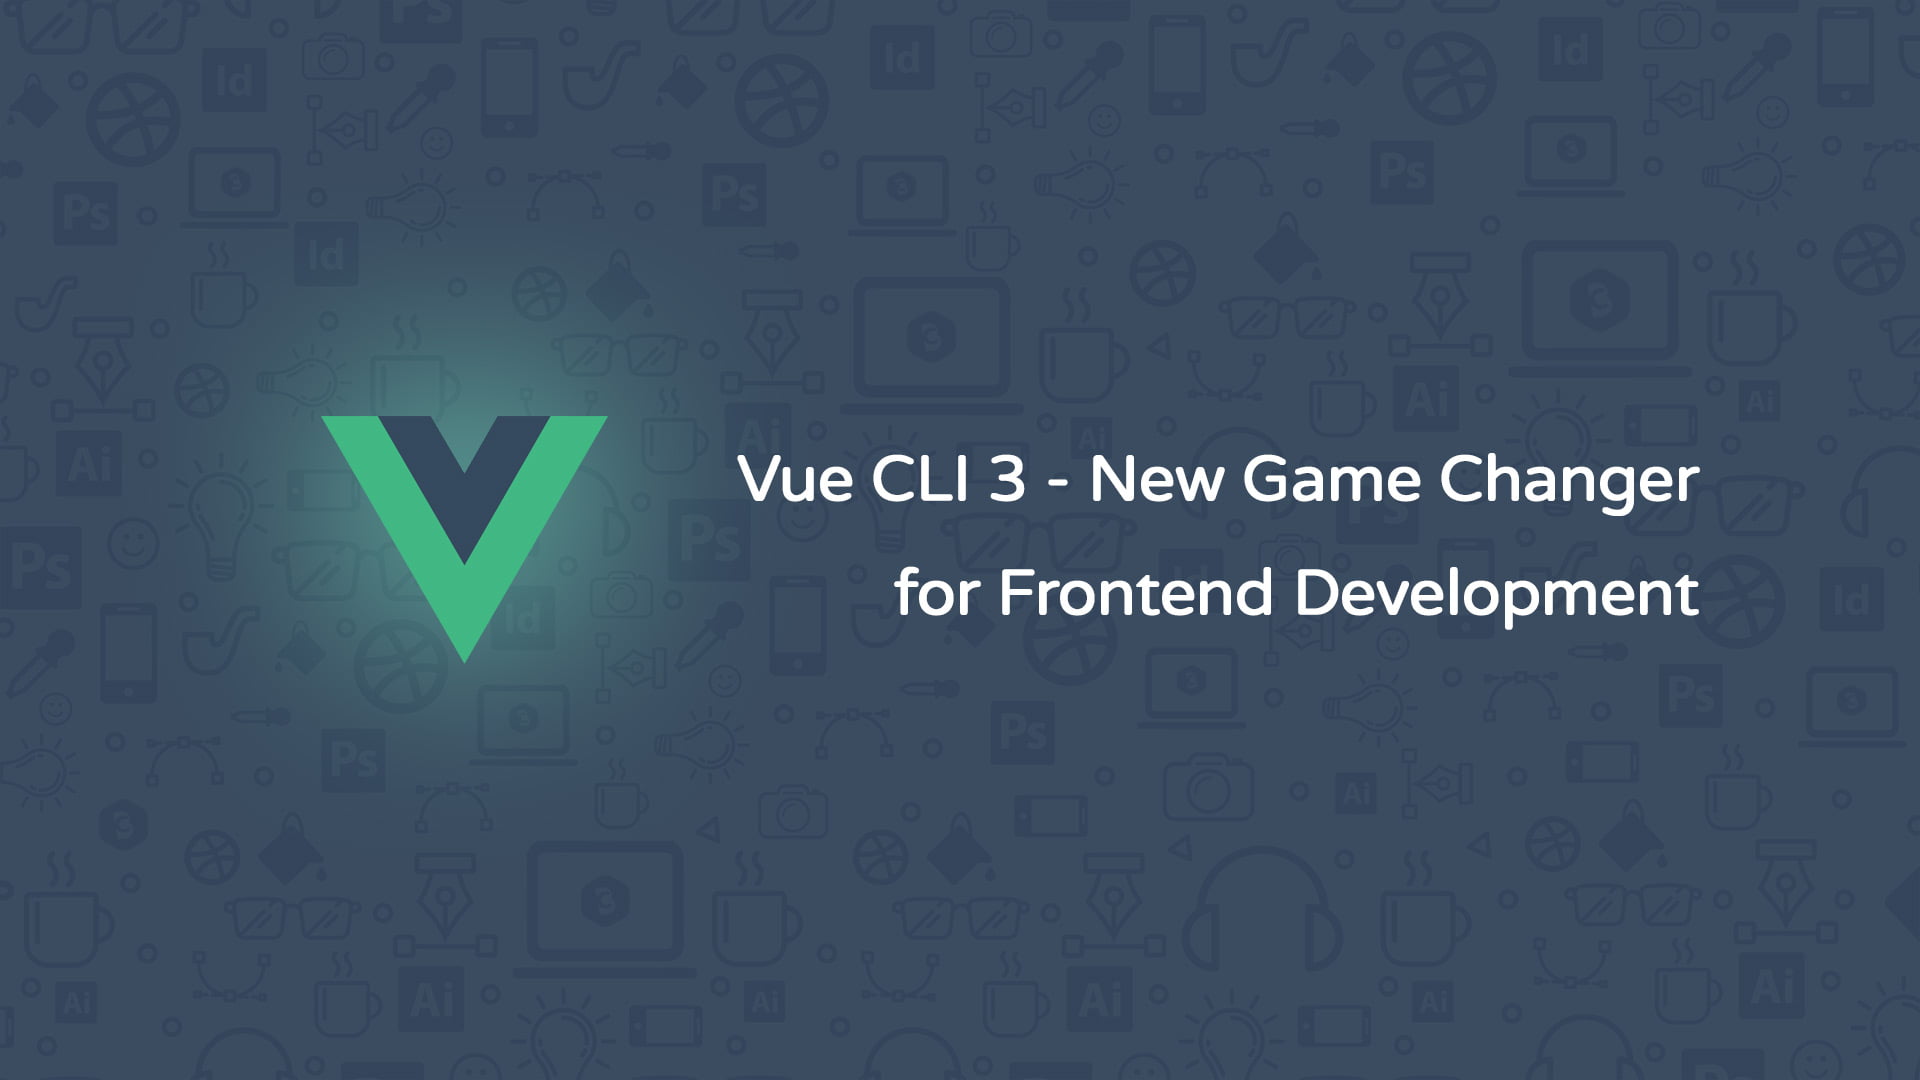 Vue CLI 3 - New Game Changer for Frontend Development